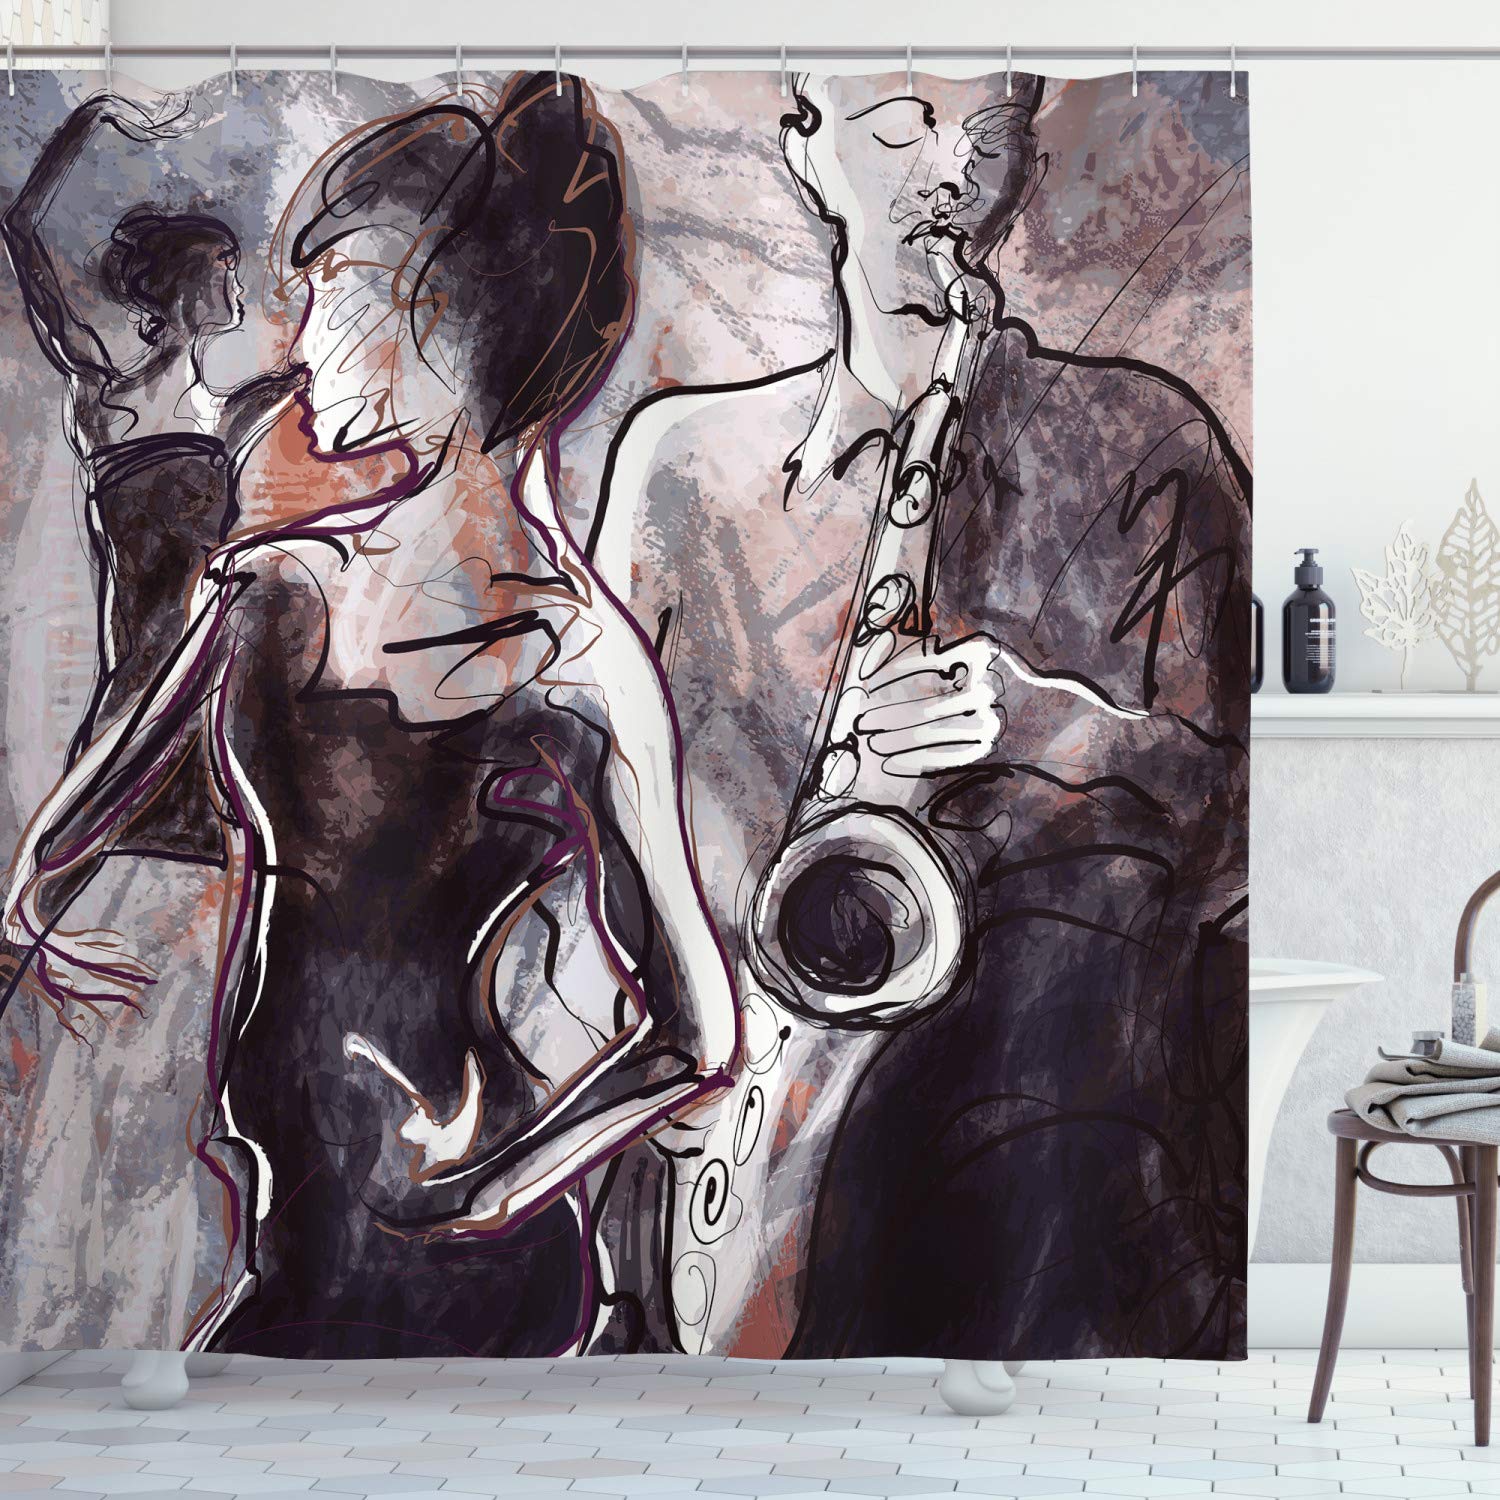 Ambesonne Jazz Music Decor Shower Curtain, Illustration of Jazz Man Playing The Saxophone with Dancers Classic Home Decor, Bathroom Set with Hooks, 75 Inches Long, Brown Mauve